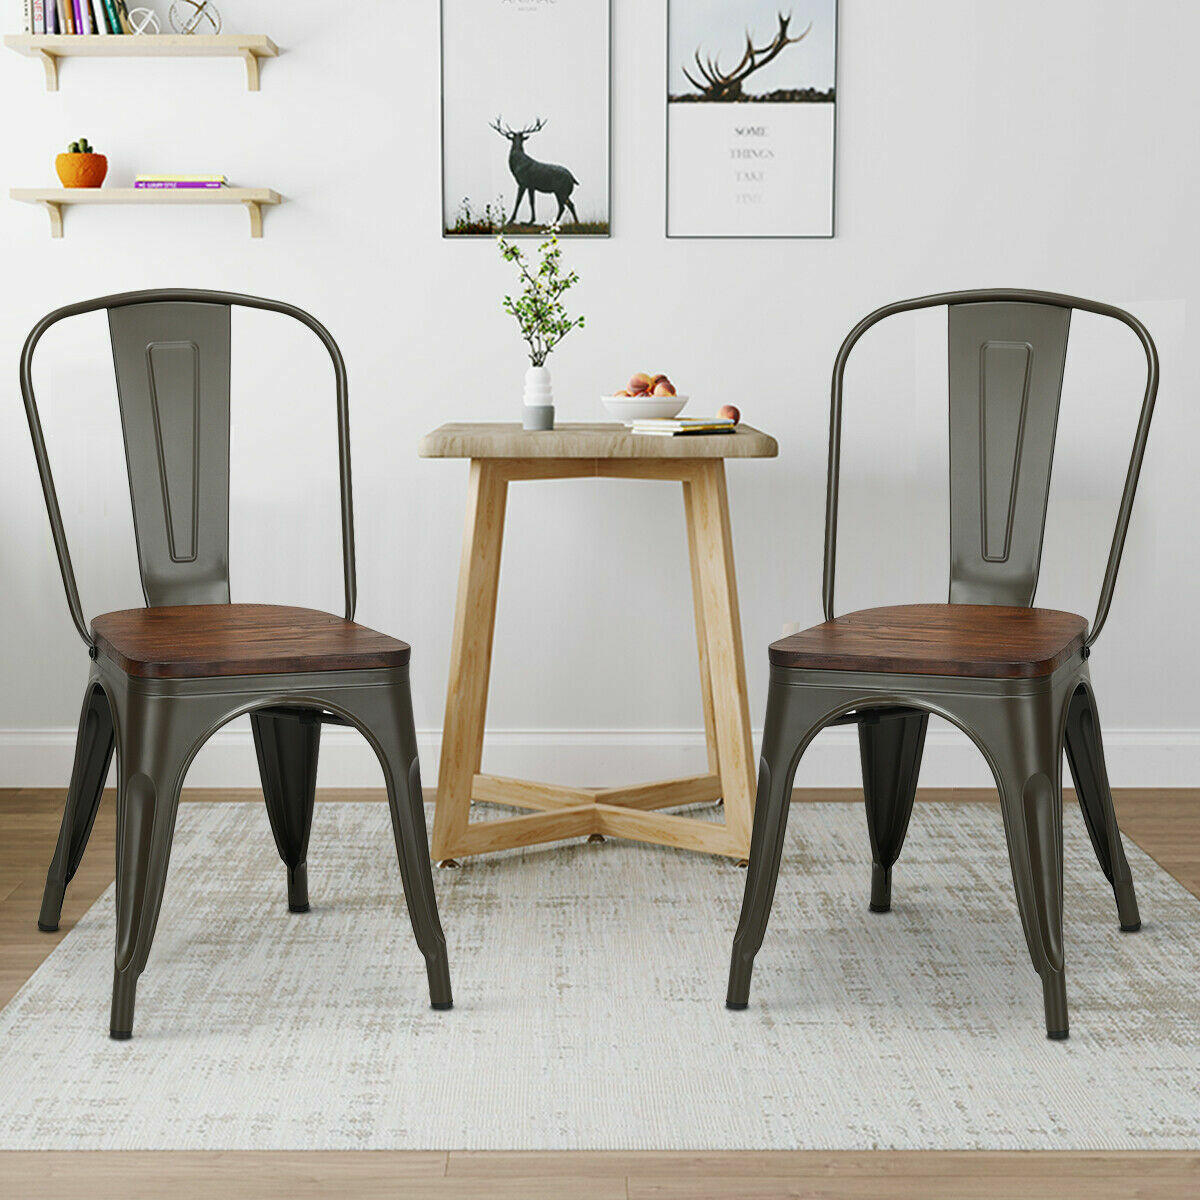 Metal Chair Set of 4 - Metal Dining Chairs With Rubber Feet